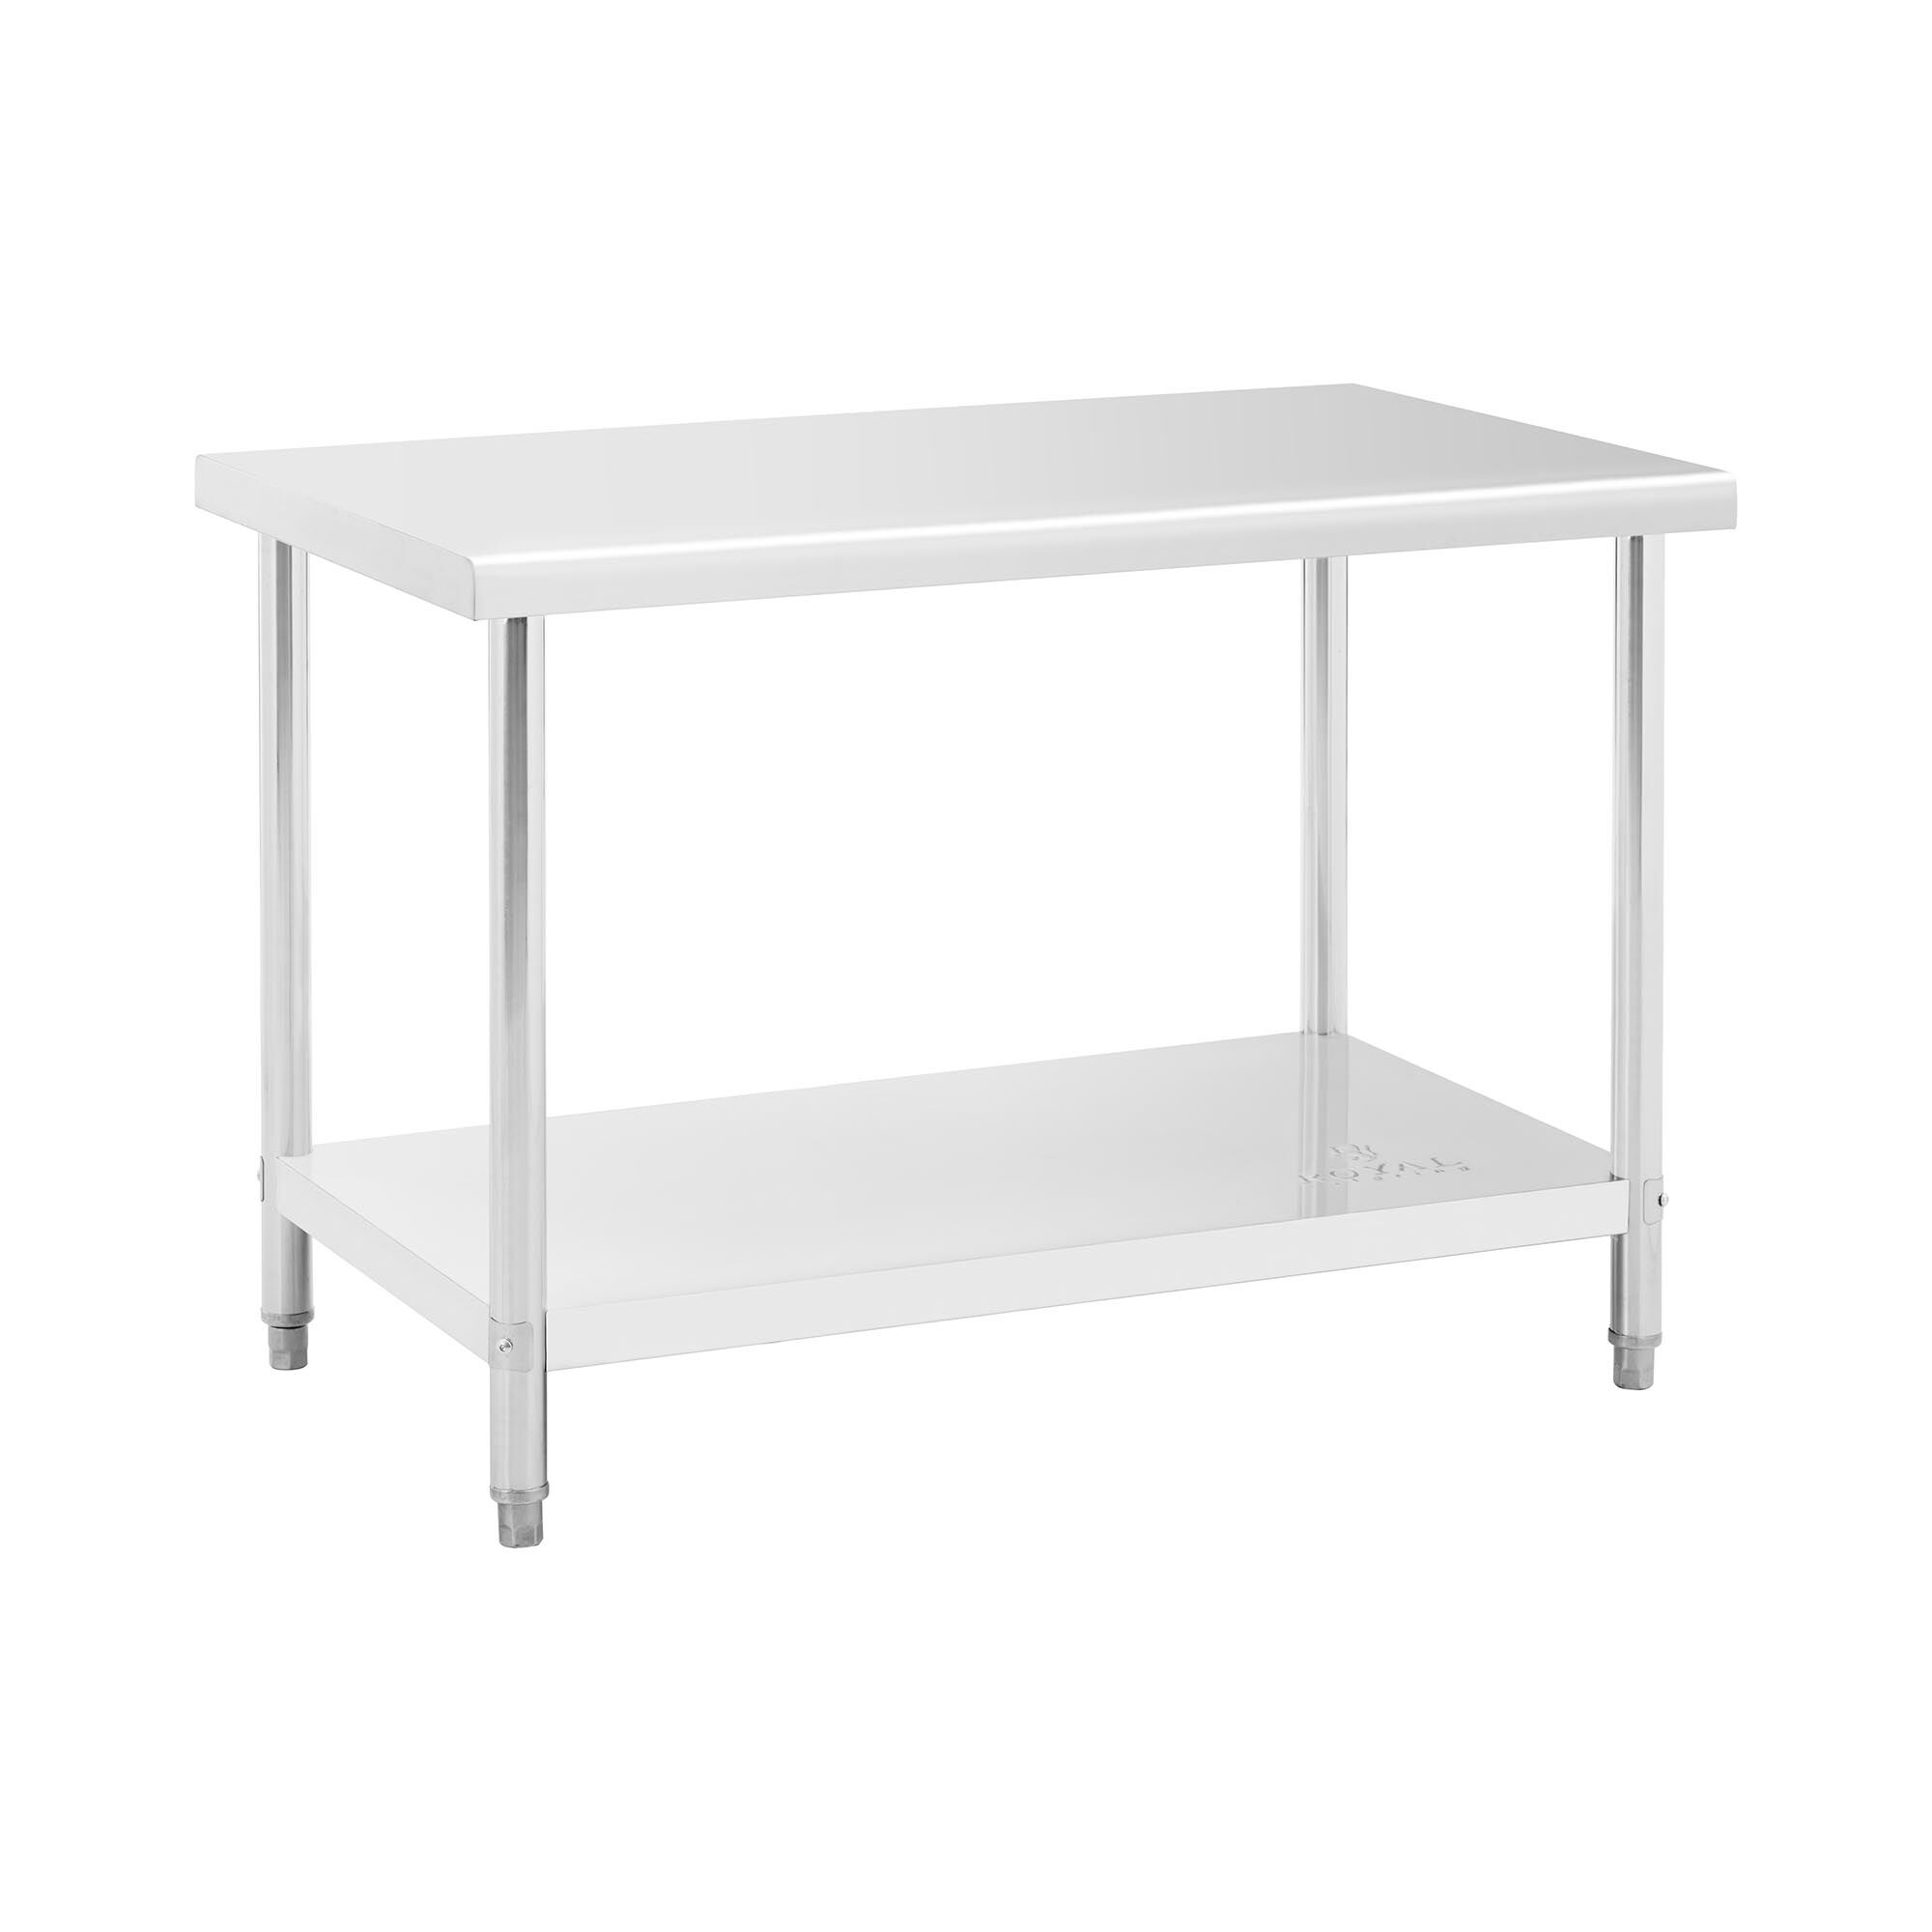 Royal Catering Stainless Steel Table - 120 x 70 cm - 115 kg capacity RCAT-120/70-NW